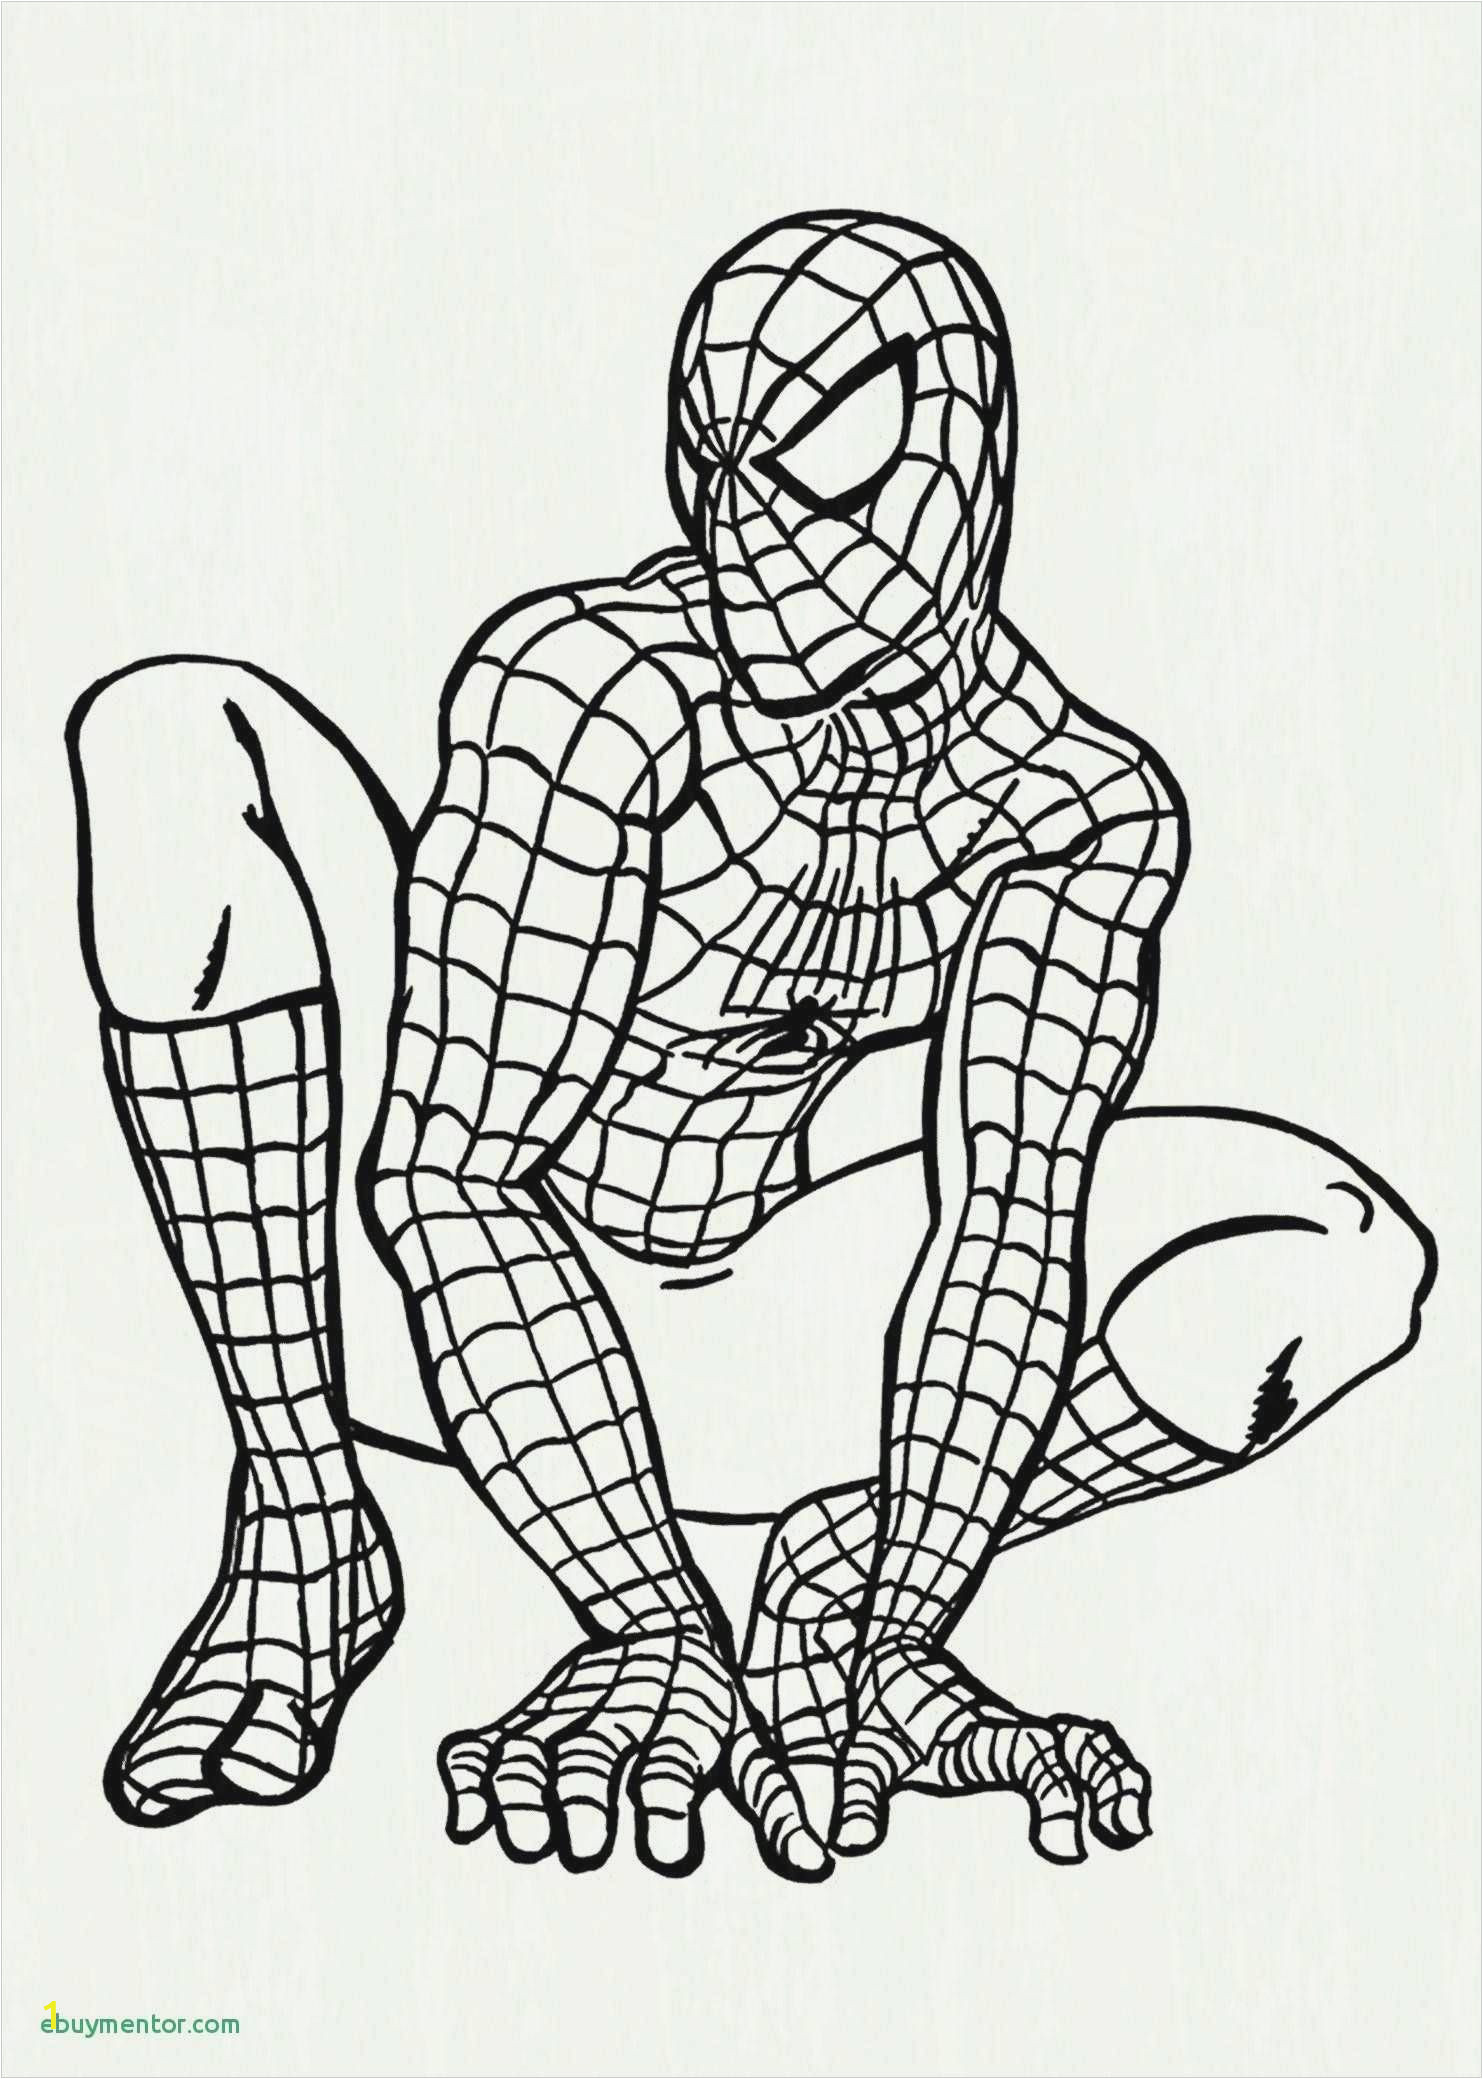 Spiderman Coloring Pages Online Game 5 Free Coloring Games Printable In 2020 with Images